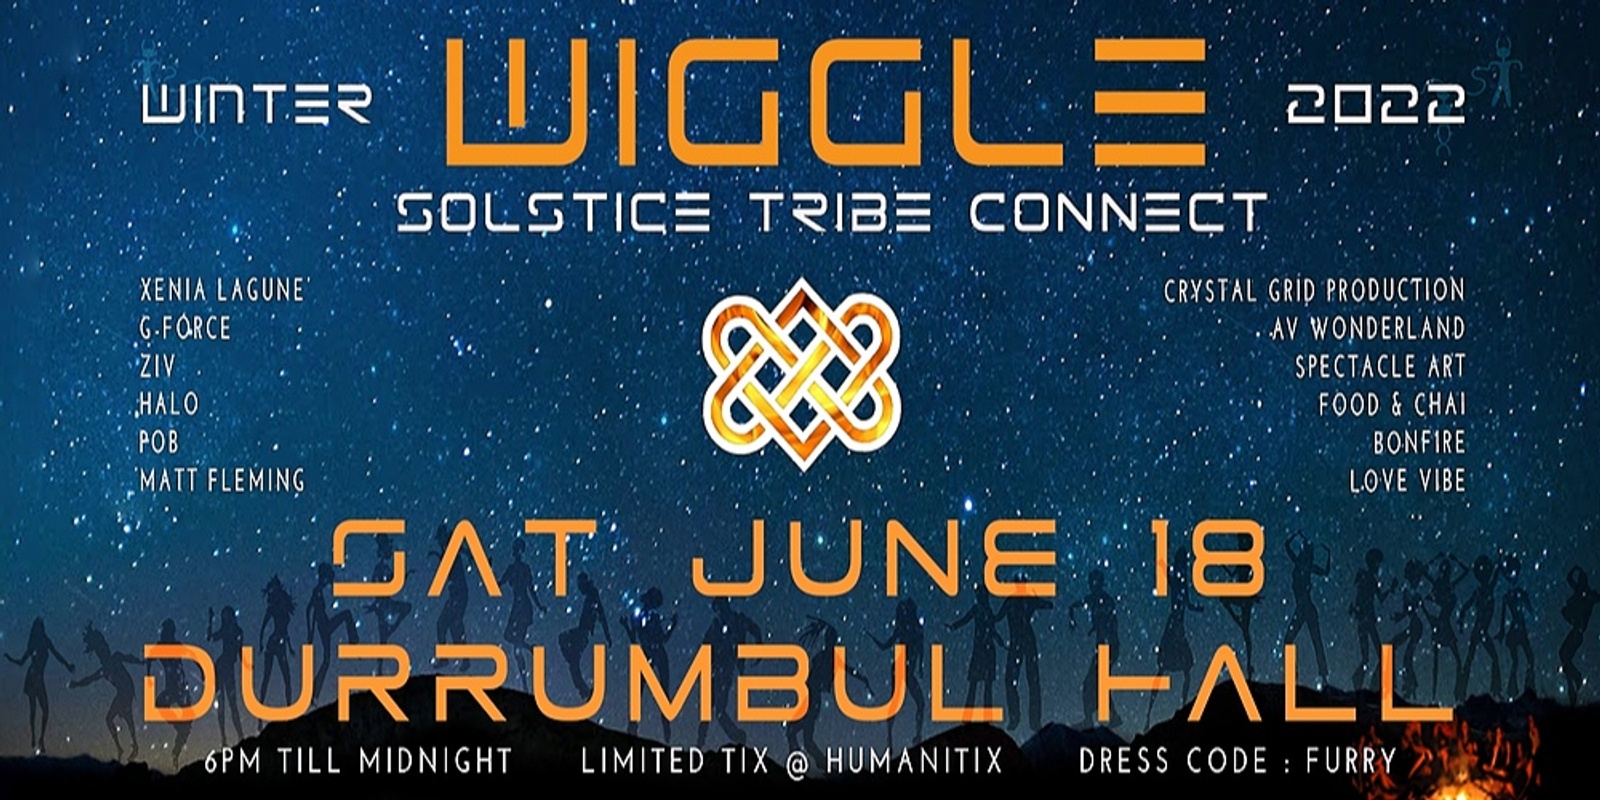 Banner image for Winter Wiggle - Solstice Tribe Connect